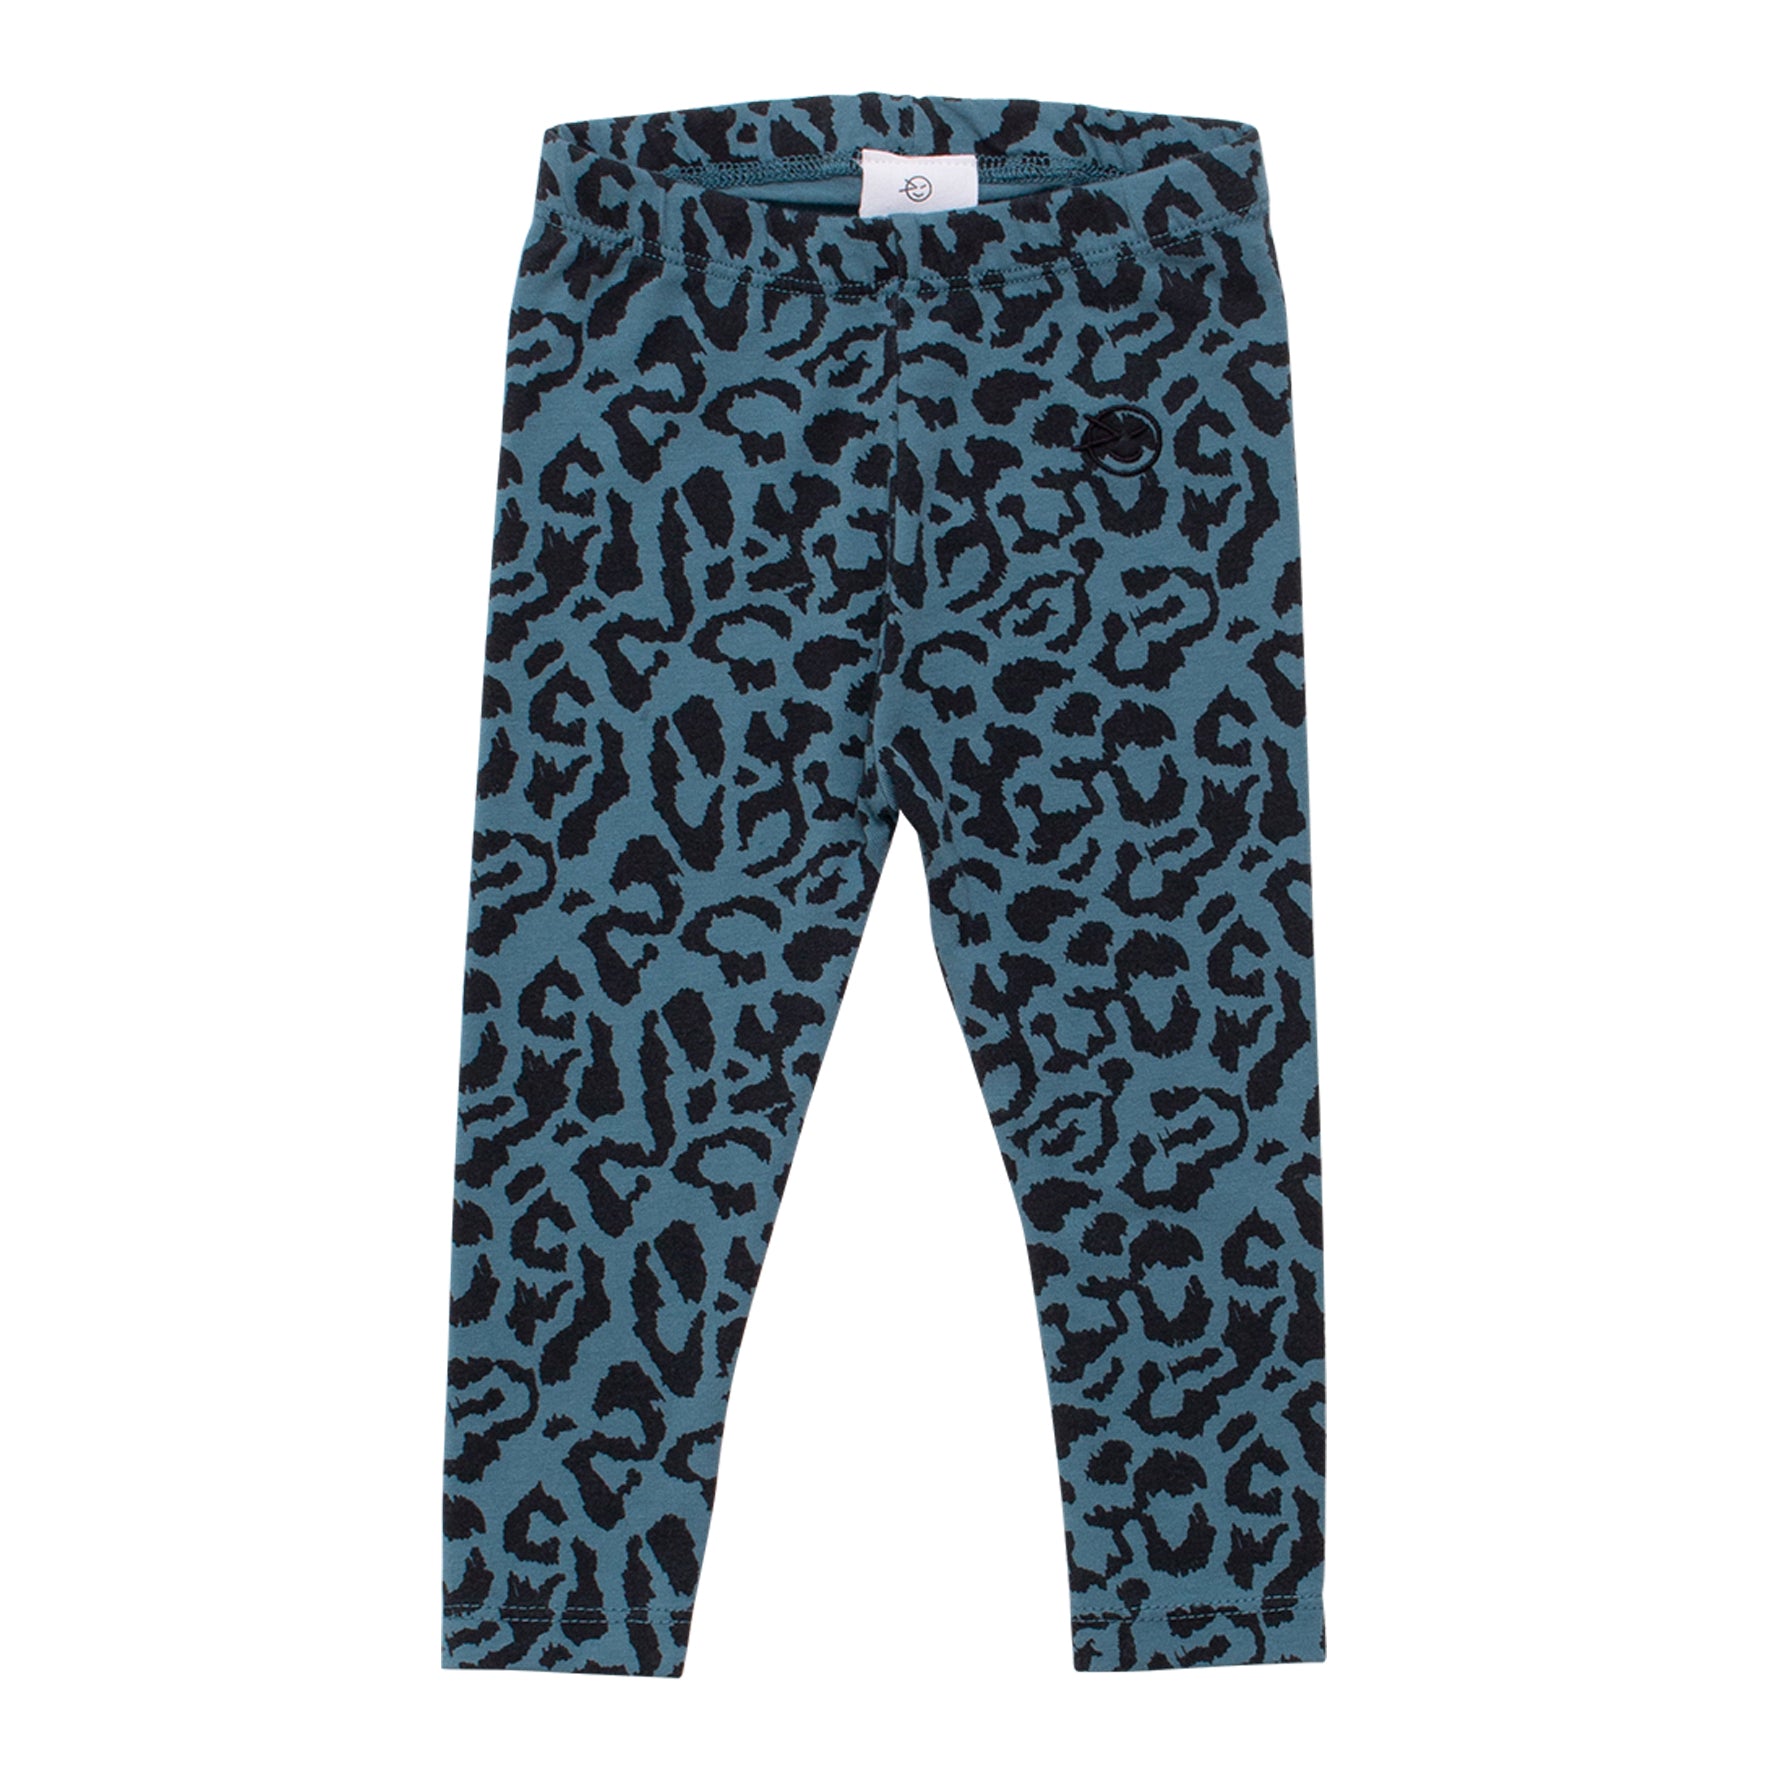 Baby Luna Legging - Frosted Green Animal Print